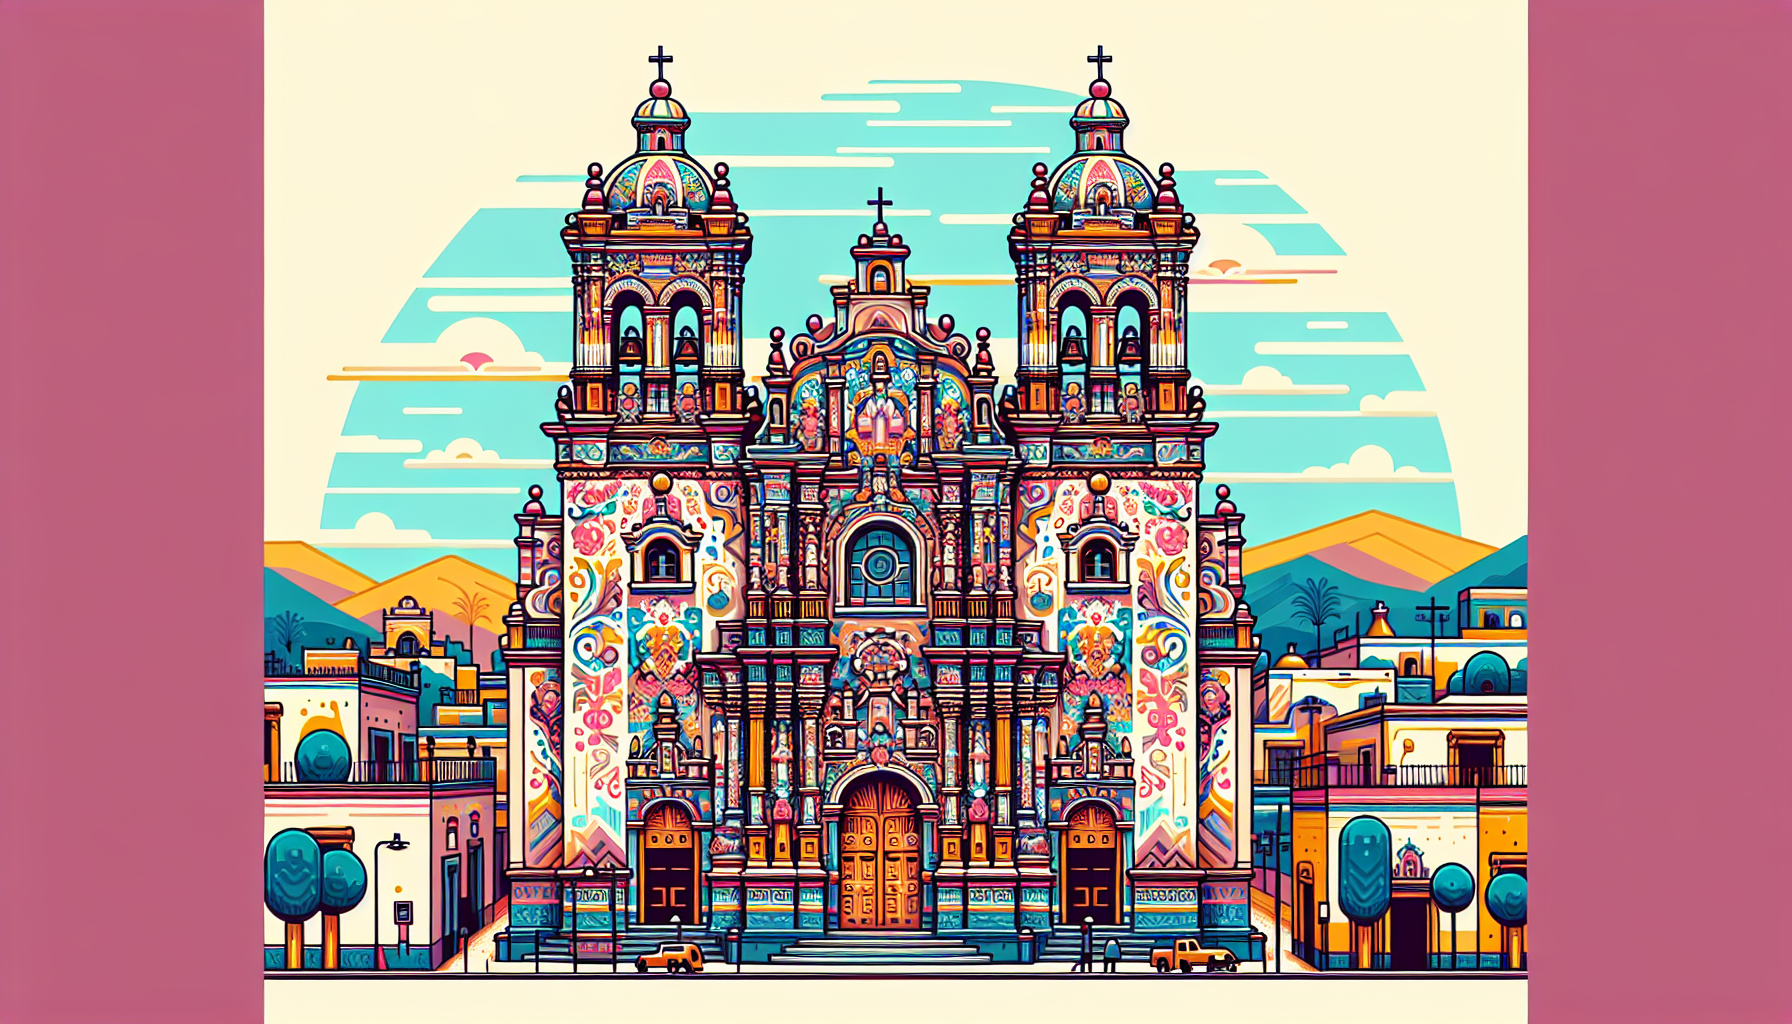 Create an image of a picturesque church in Puebla, Mexico, showcasing intricate architectural details and vibrant colors that highlight the rich cultural heritage and beauty of the region.